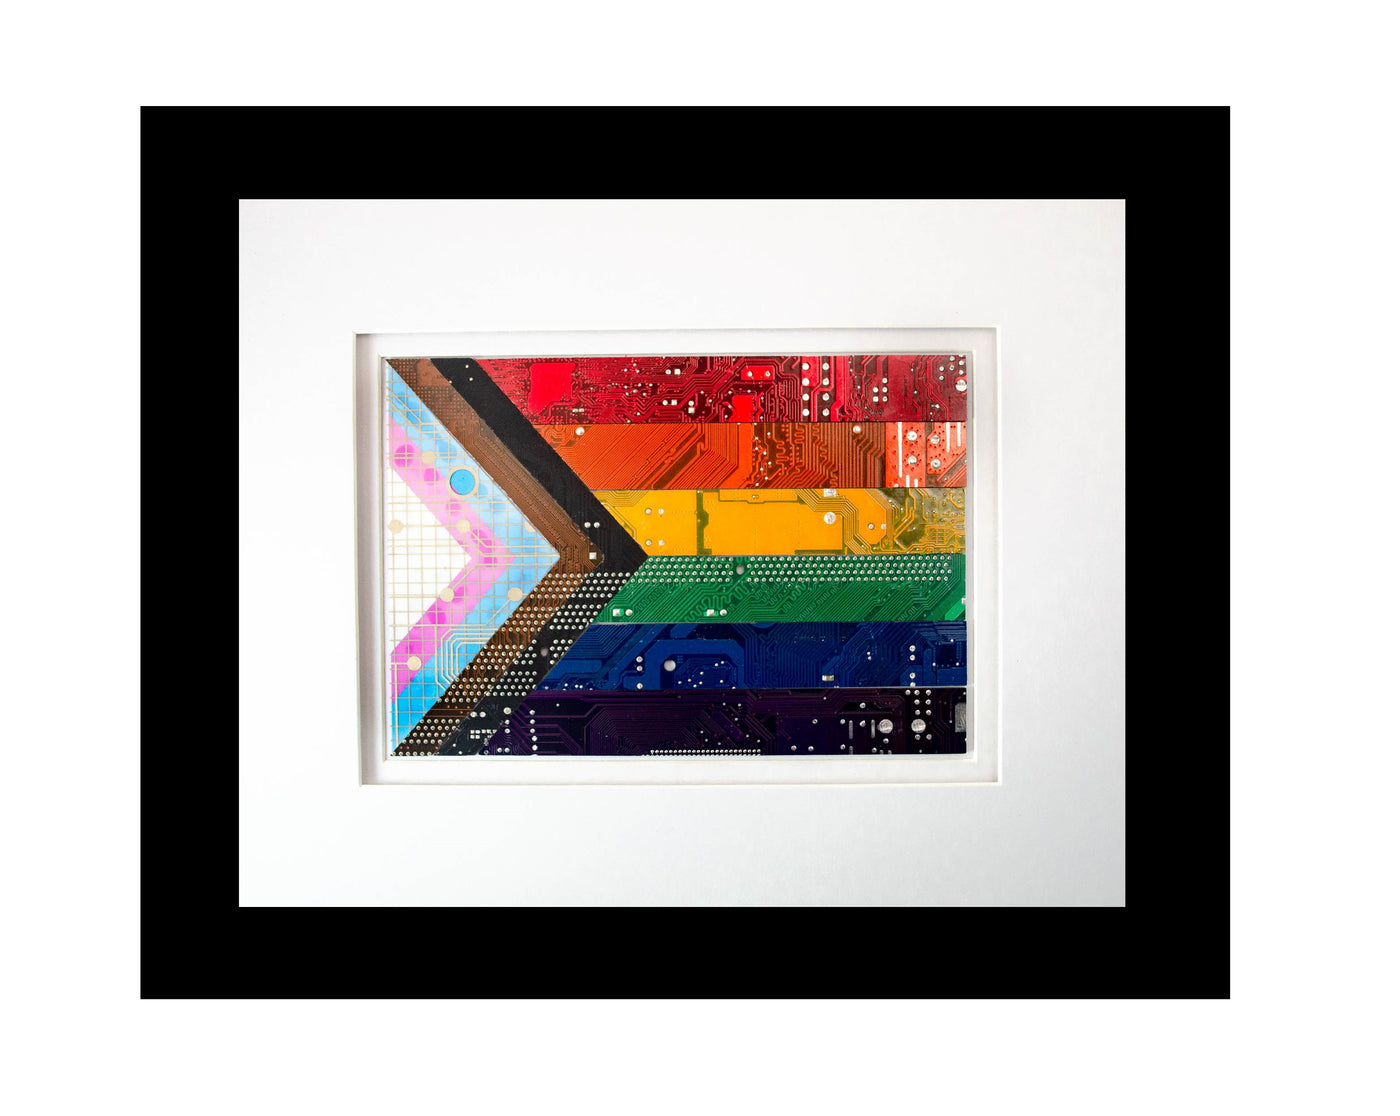 inclusive pride flag made from recycled circuit boards and framed